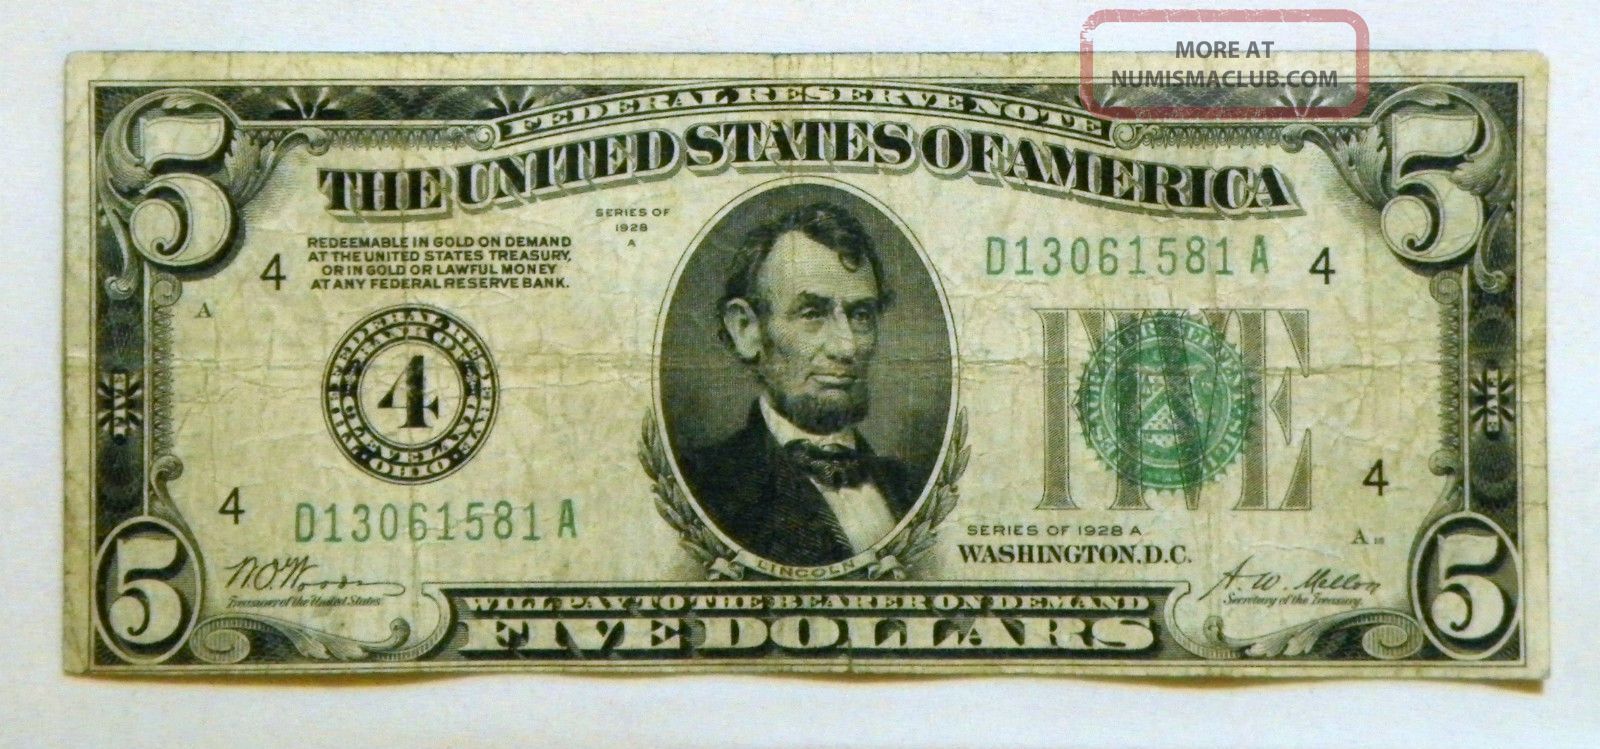 1928a $5 Redeemable In Gold On Demand Note Woods - Mellon Da Block Number 4 Small Size Notes photo